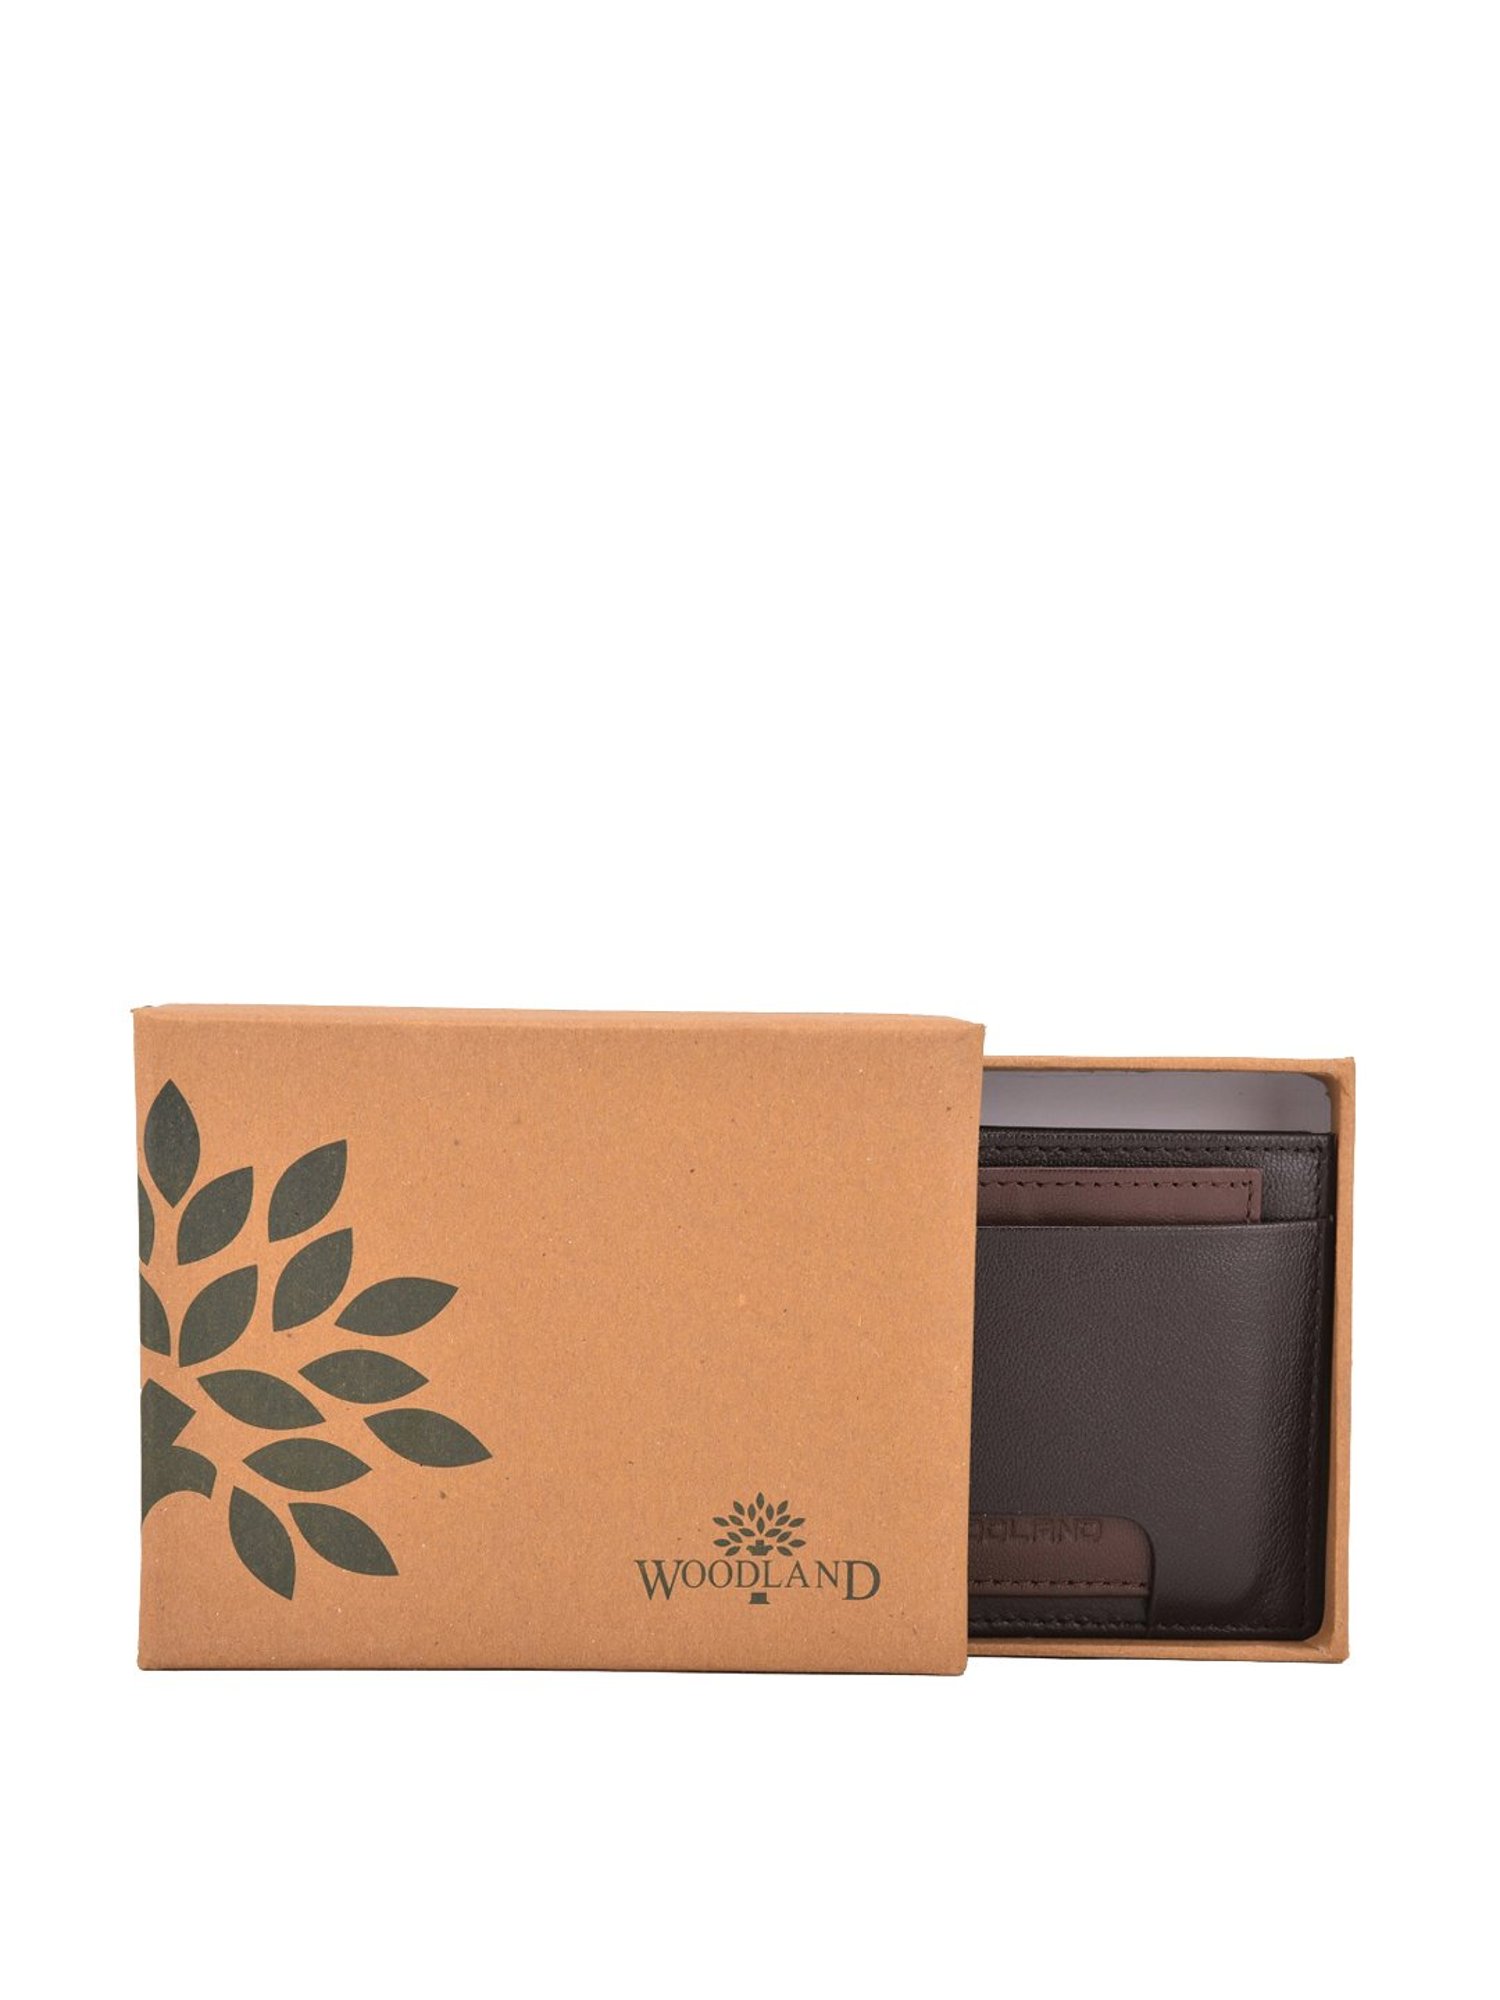 Buy Hammonds Flycatcher Pure Leather Wallet for Men - RFID Bifold with 6  Card Slots, Zipper & Coin Pockets - Gift for Him @ ₹506.00